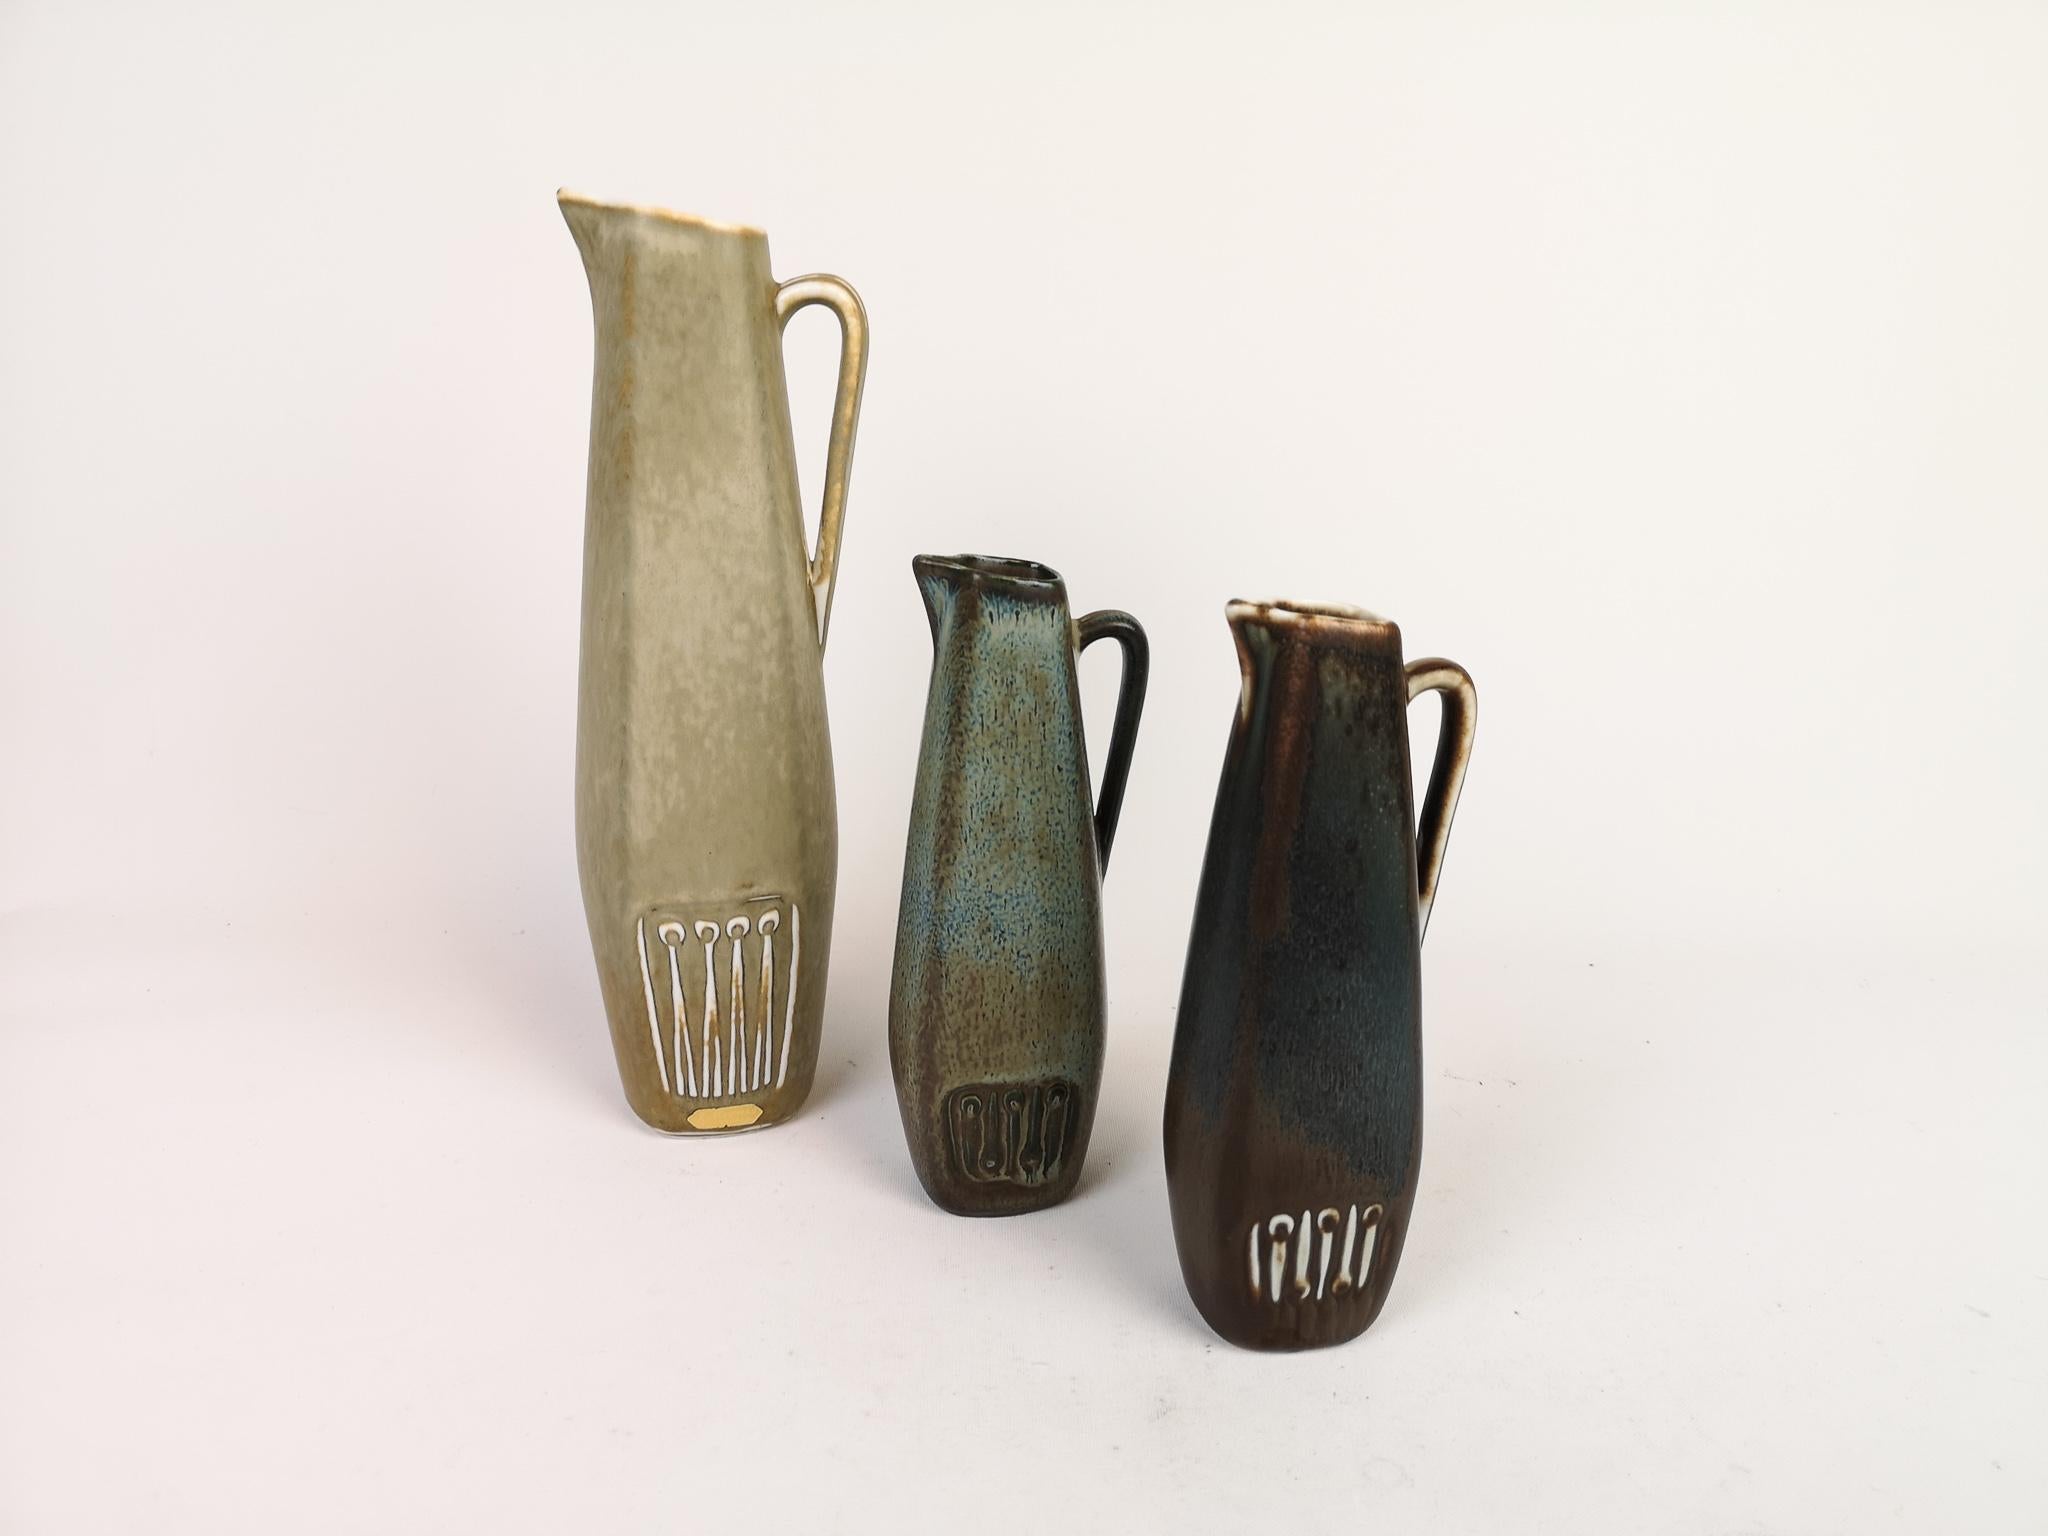 Three wonderful pieces made in Sweden during the 1950s at Rörstrand factory and designed by Gunnar Nylund

The vases have nice antique look in a modern shape. The vases are nicely sculptured and have a nice glaze.

Good condition. 

Measures: